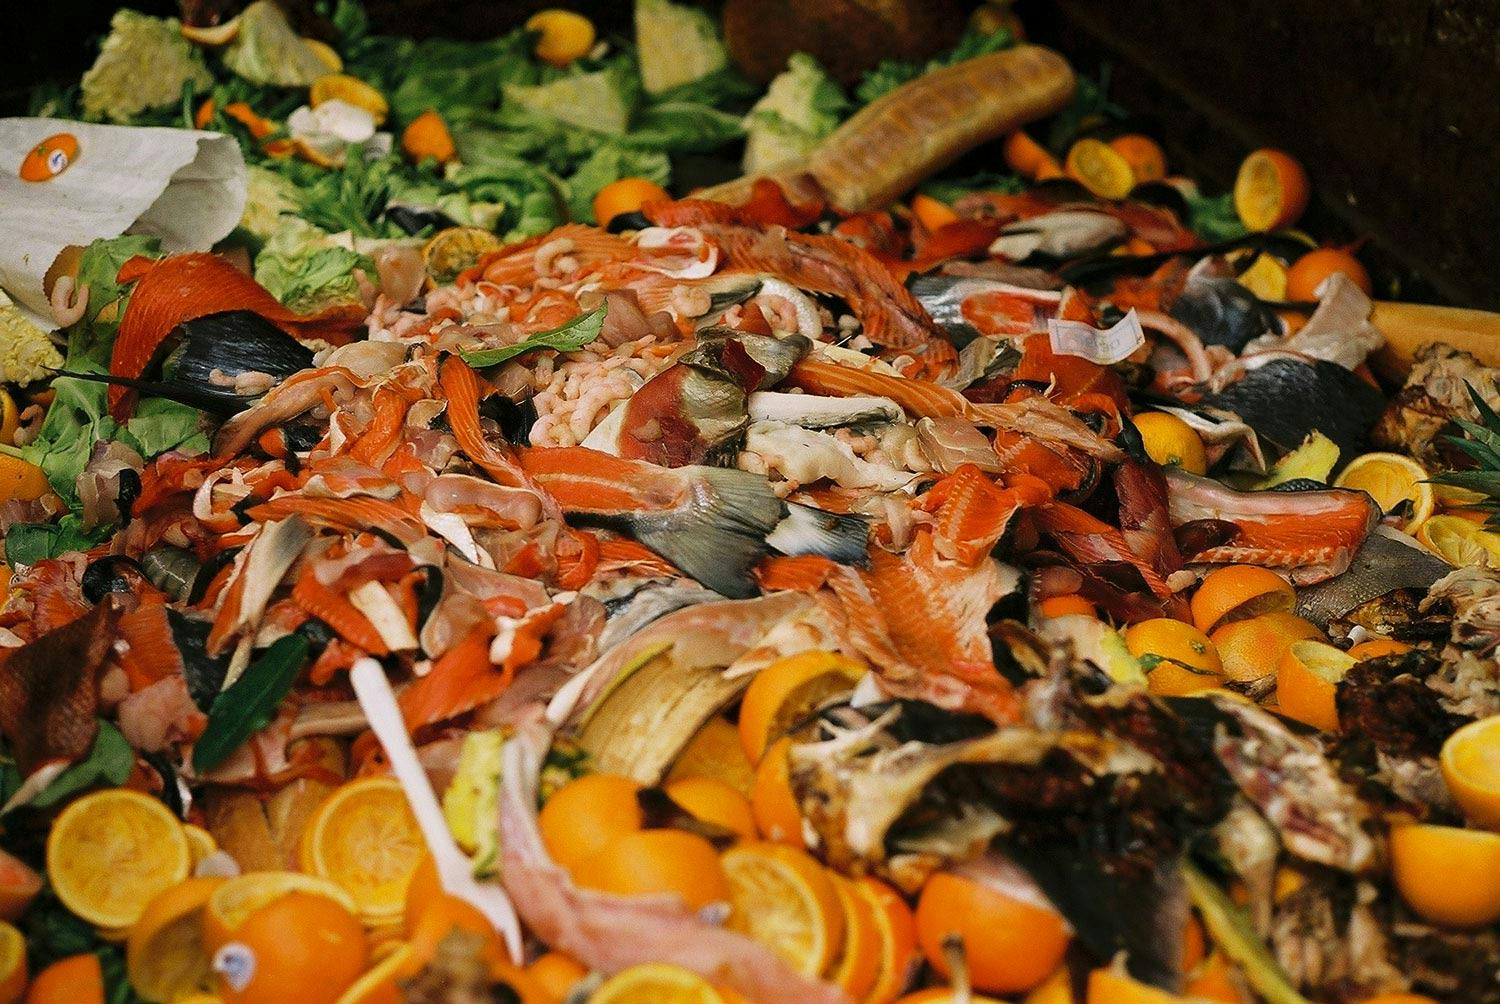 Image of a variety of food waste